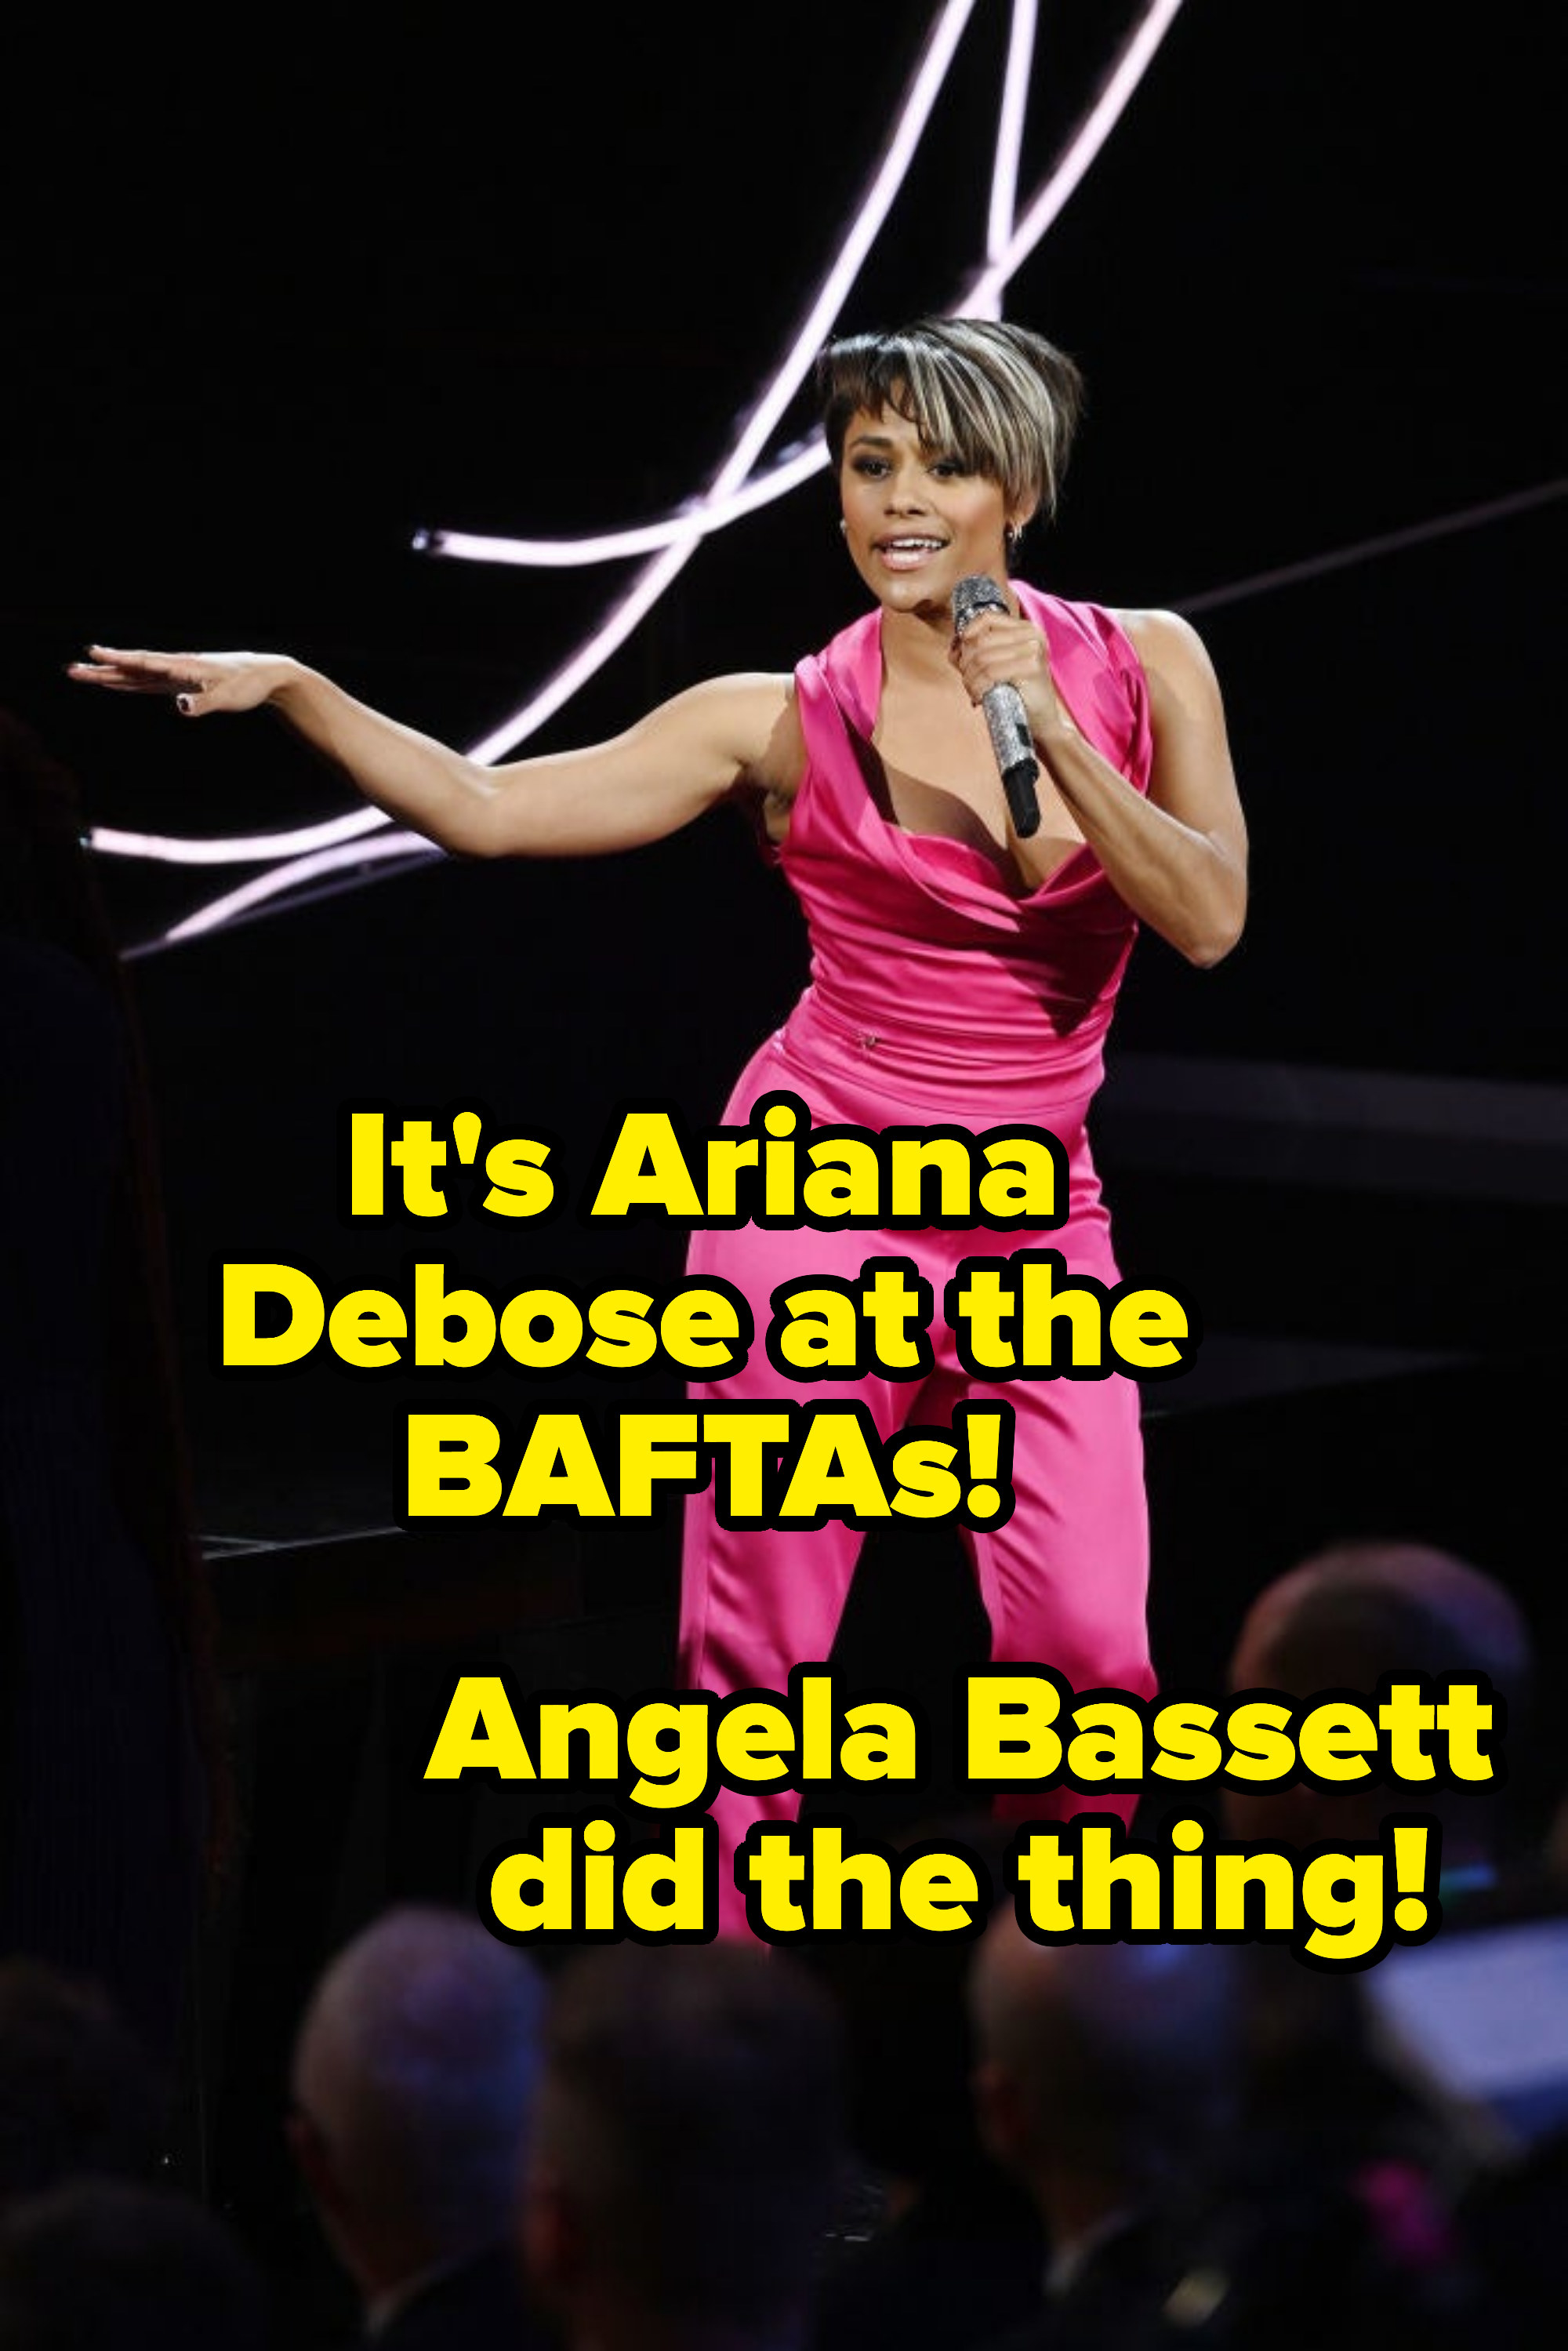 Ariana Debose singing at the BAFTAS including the now iconic line: &quot;Angela Bassett did the thing!&quot;